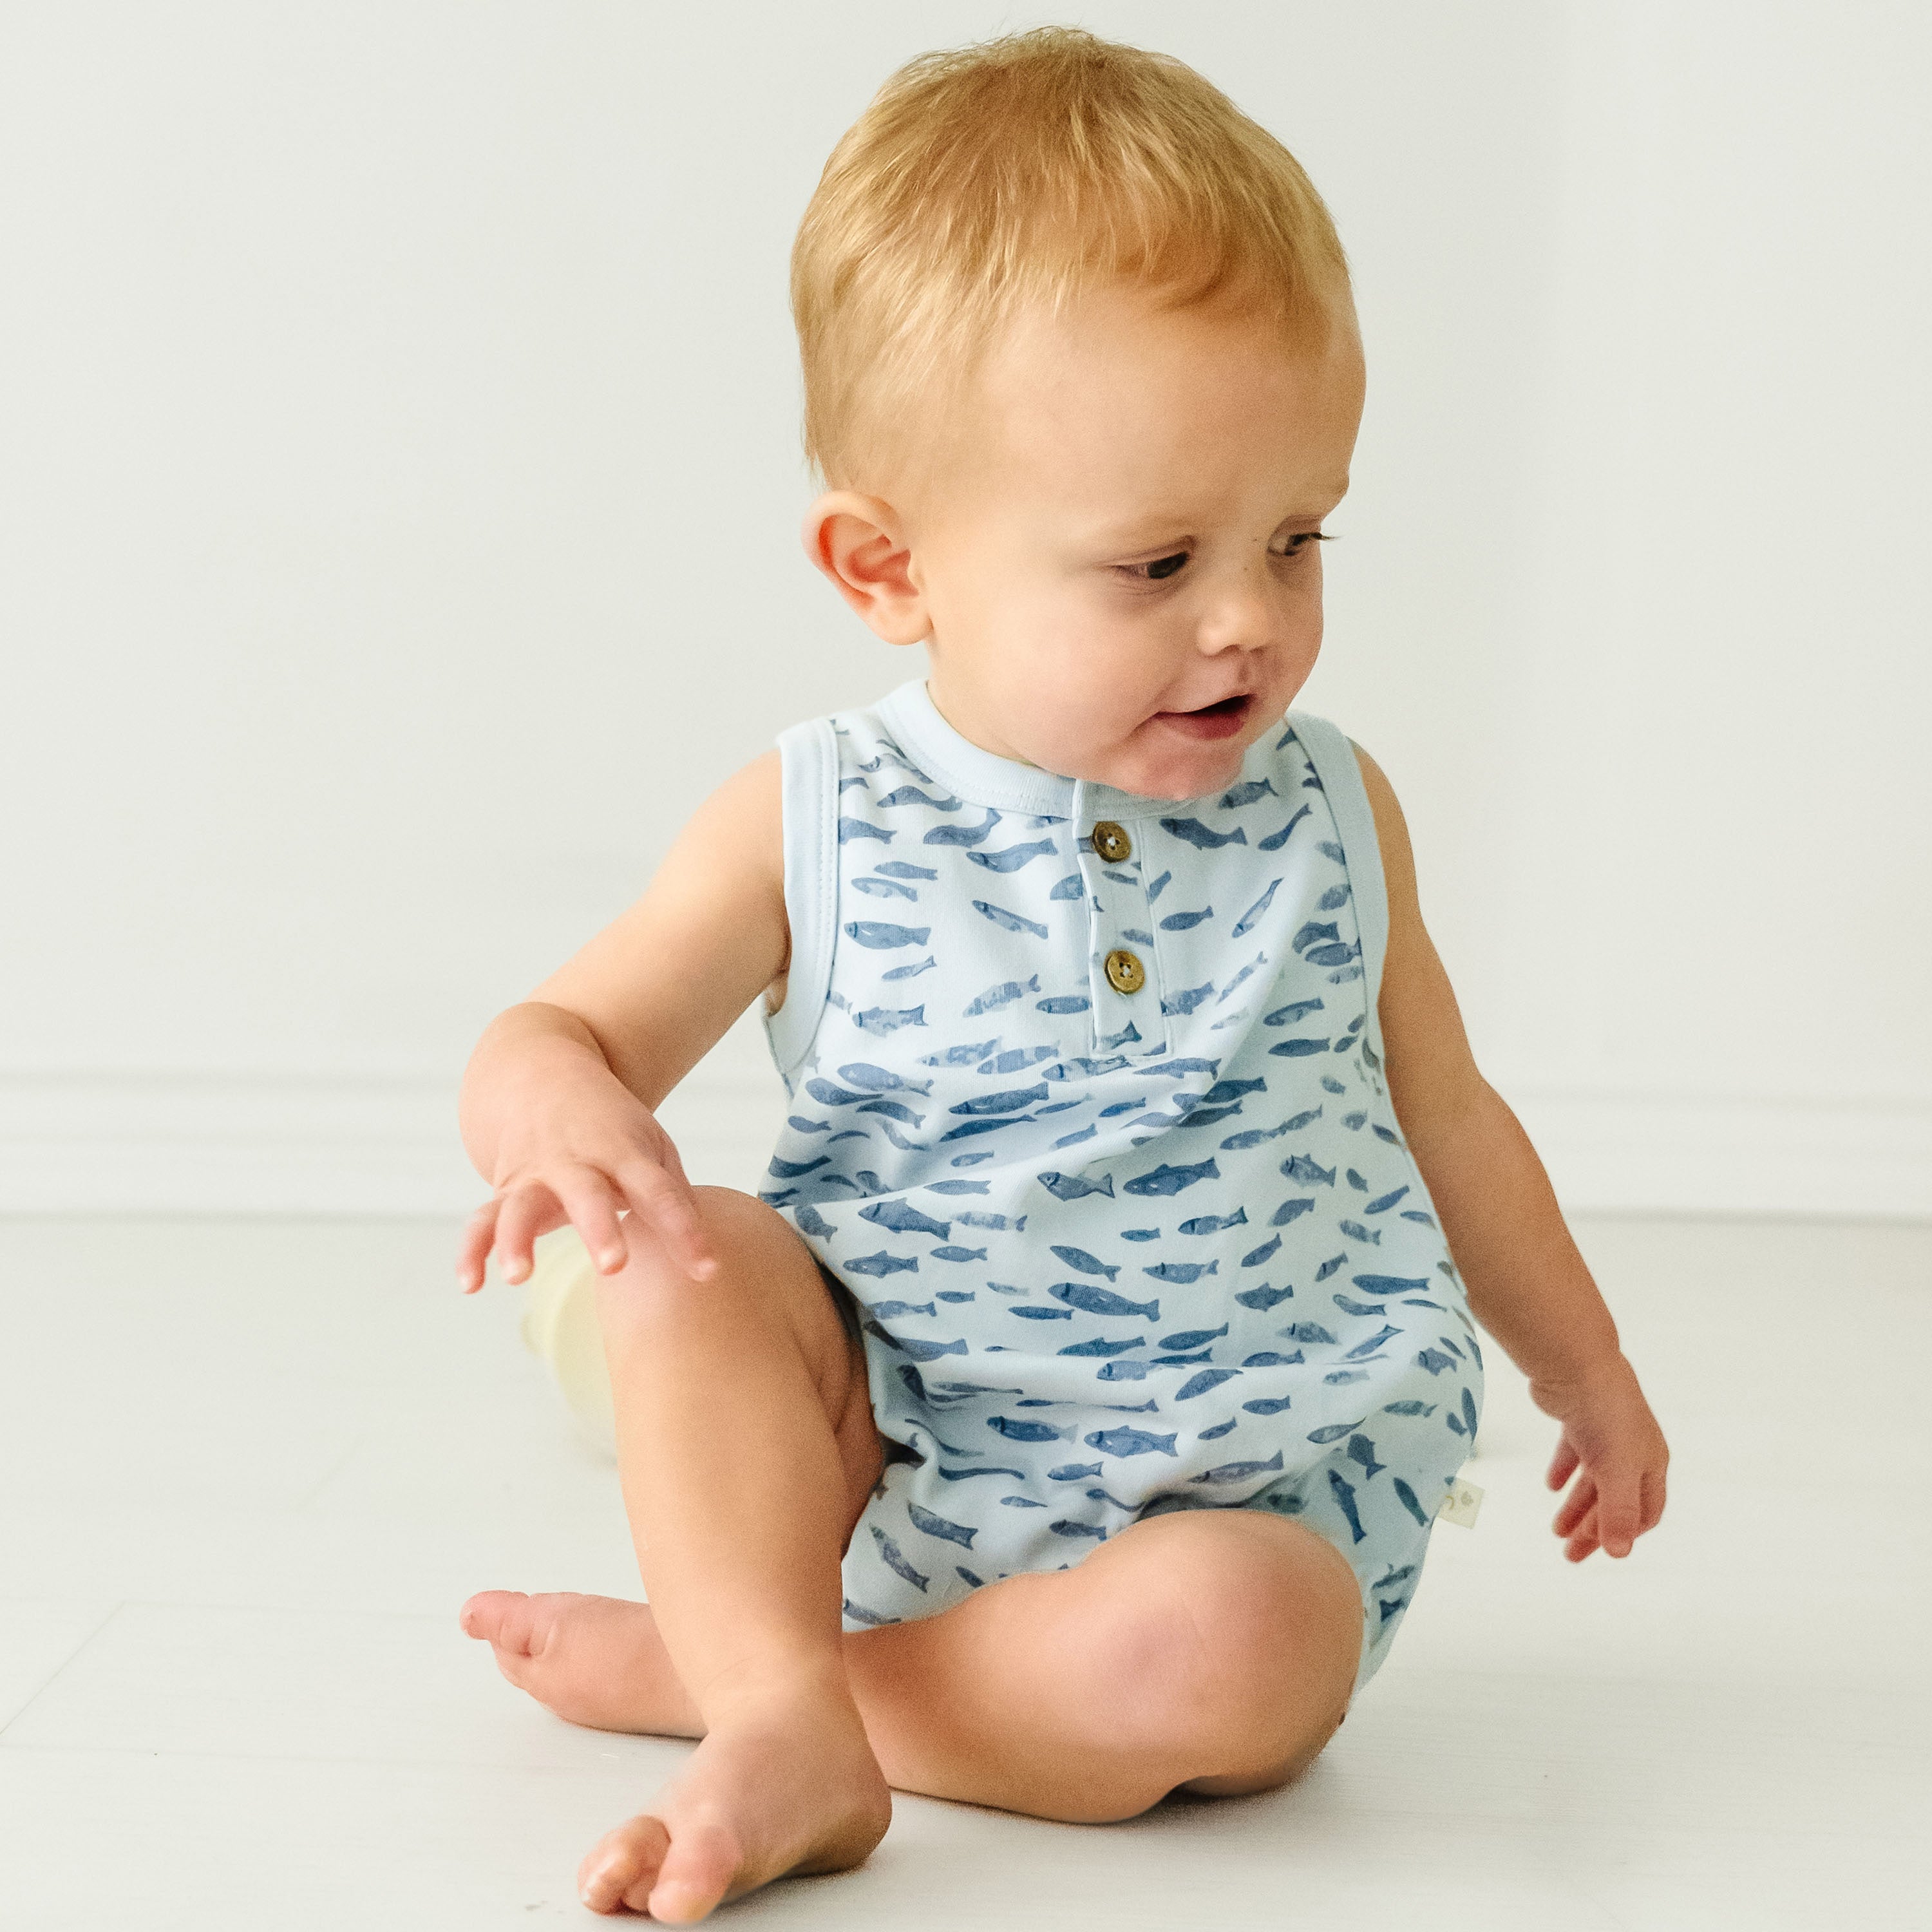 A baby with blond hair in a blue fish-patterned Minnow Organic Bubble Onesie from Makemake Organics sits on the floor, looking to the side with an expression of curiosity.